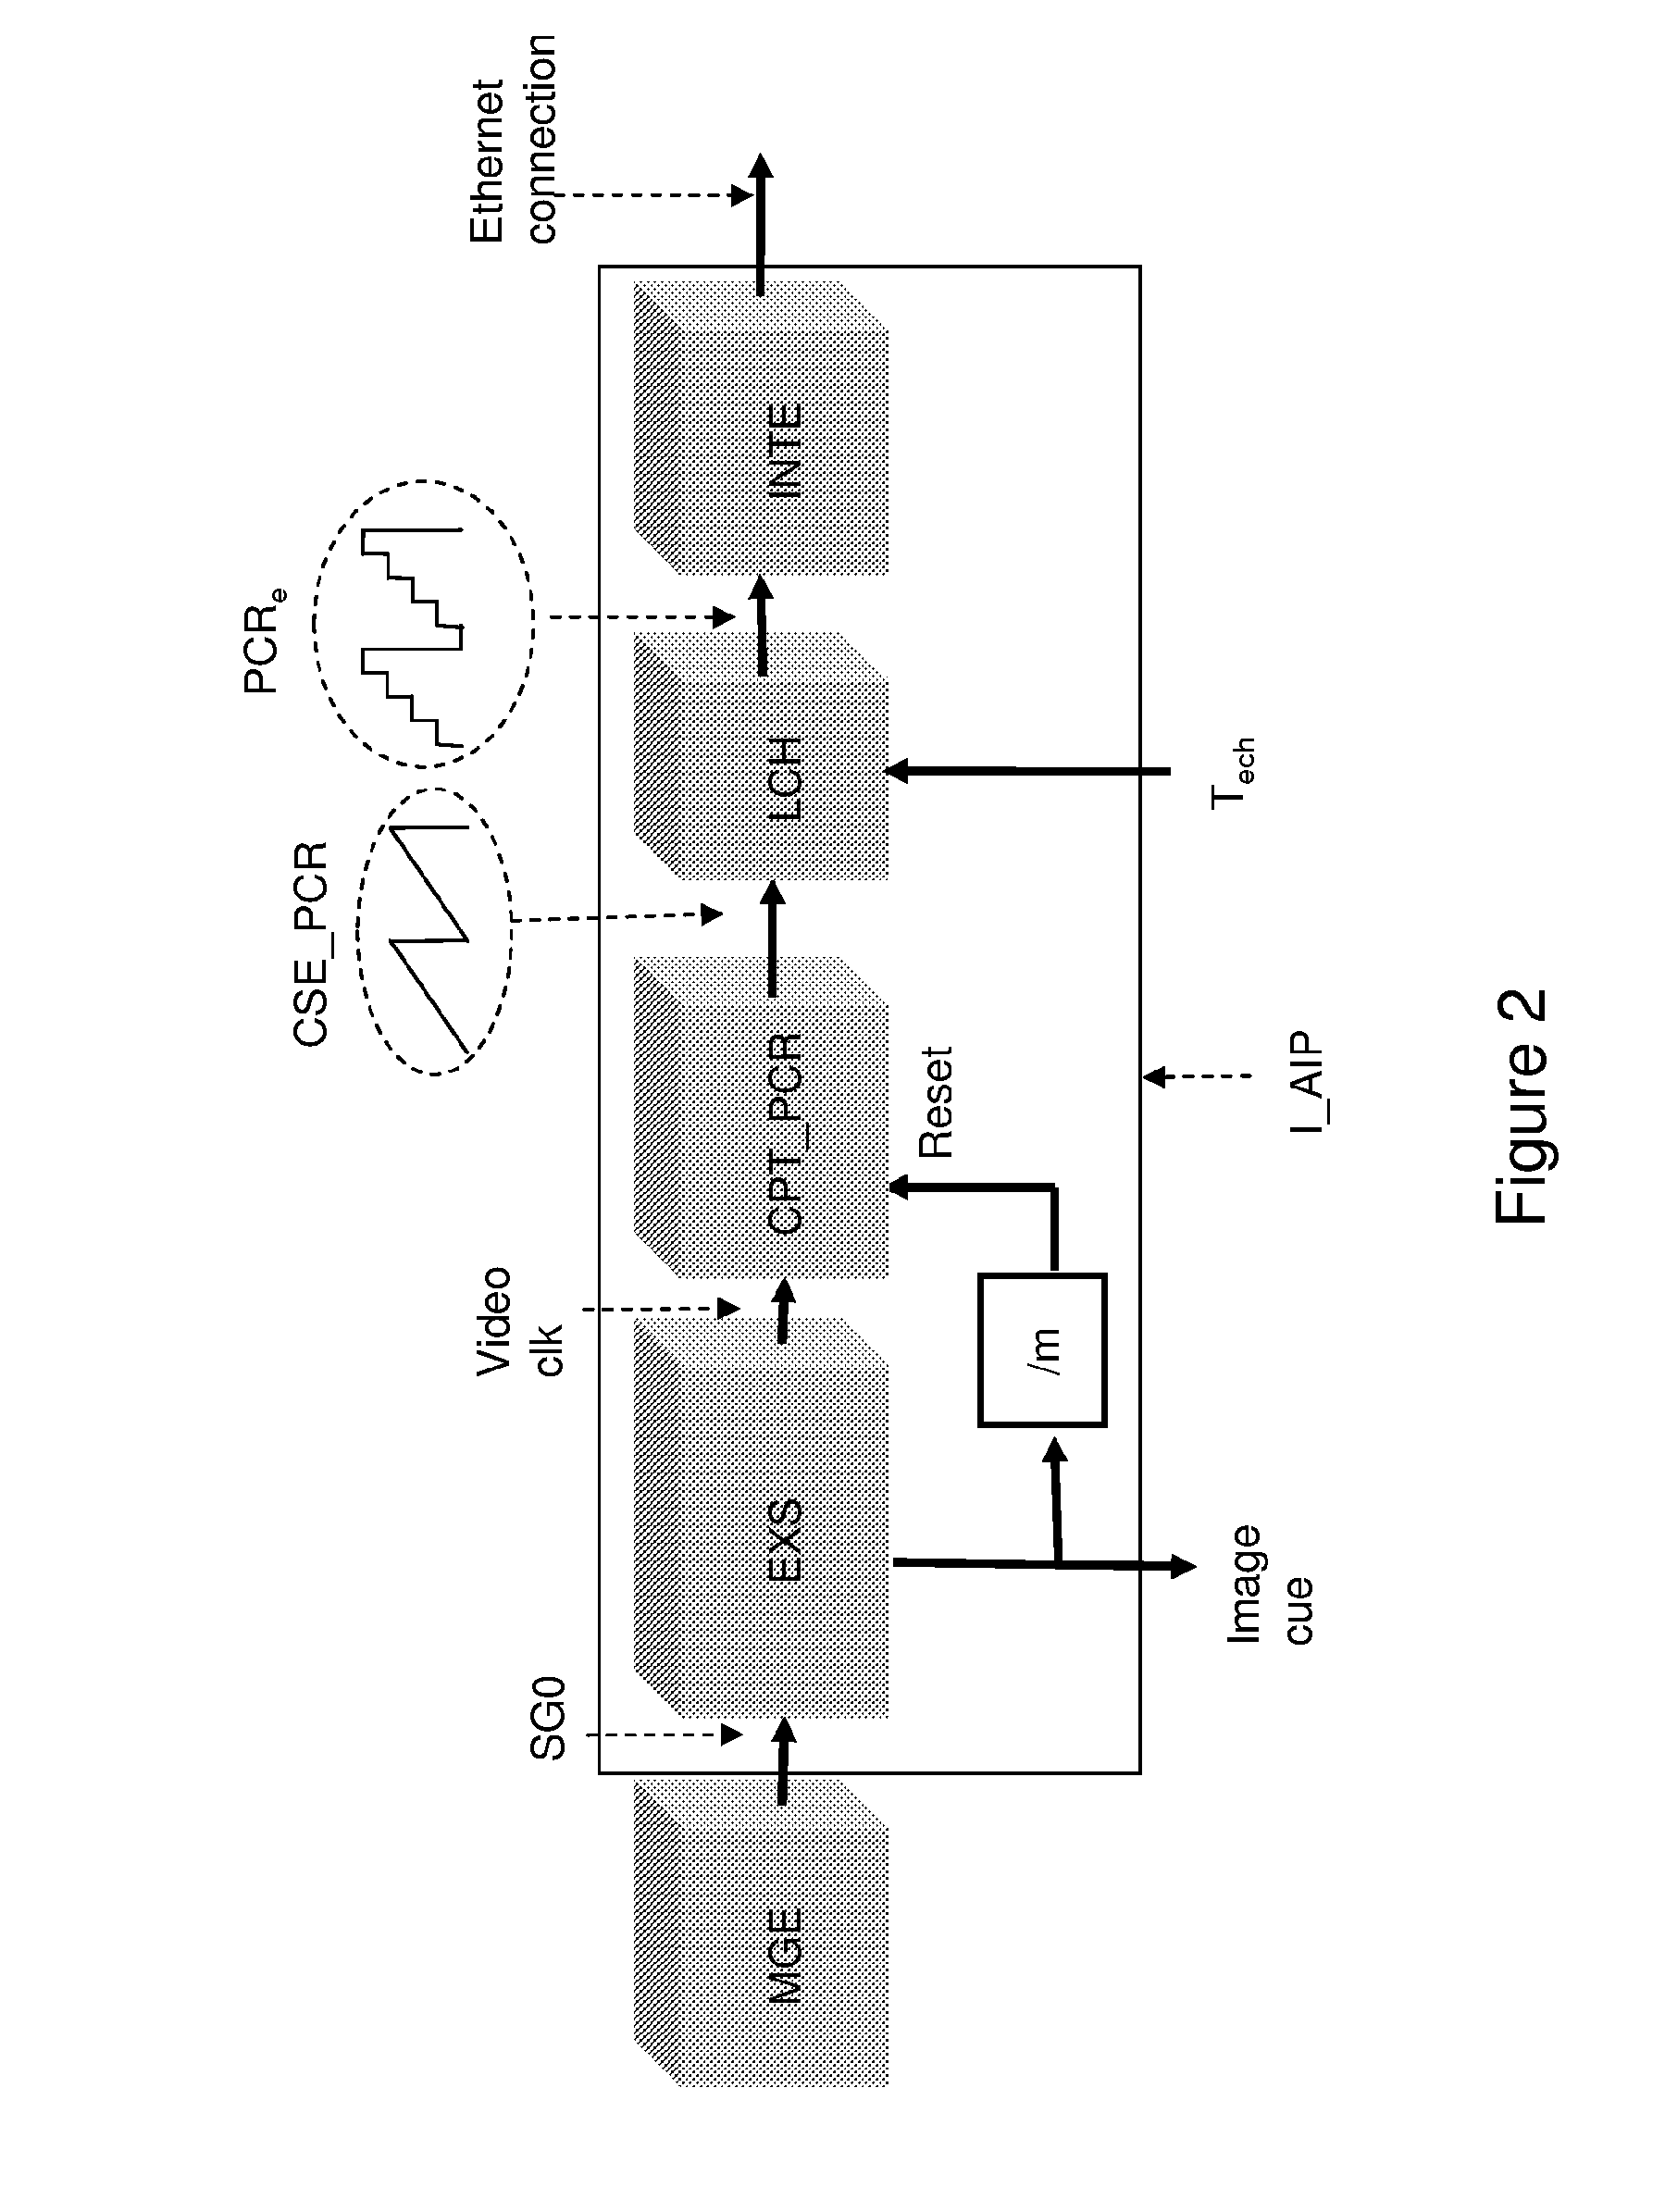 Reduction in the acquisition duration of a phase-locked loop able to reconstitute a synchronisation signal transmitted over an IP network